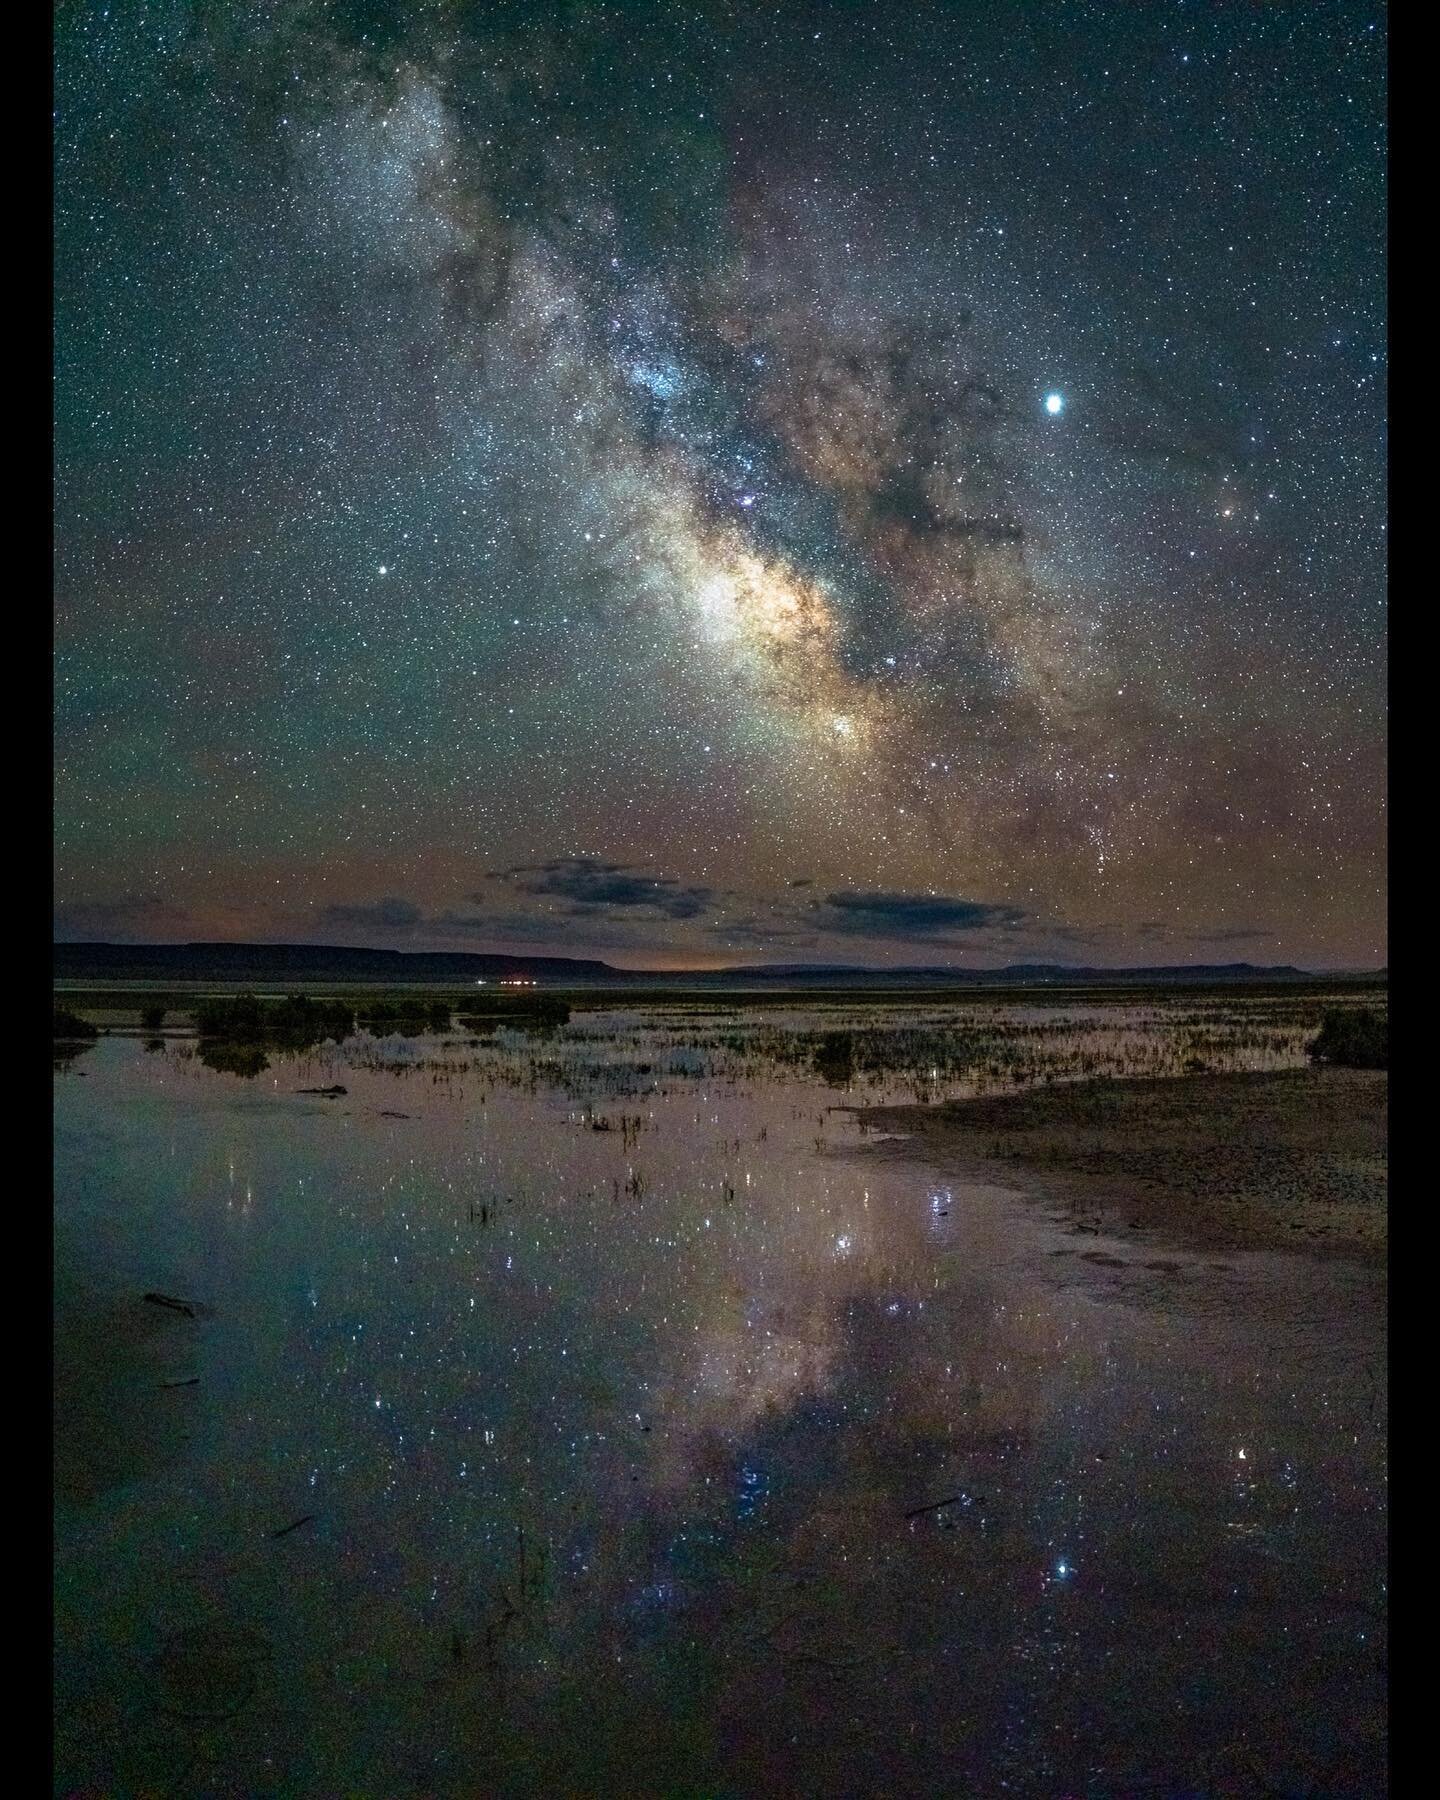 Desert Lakebed Galaxy

Getting near water on a muddy desert lakebed on a new moon night requires a bit of navigational planning. 

Staying up too late dreaming about summertime plans in my favorite place...

_____________________________
@sonyalpha A